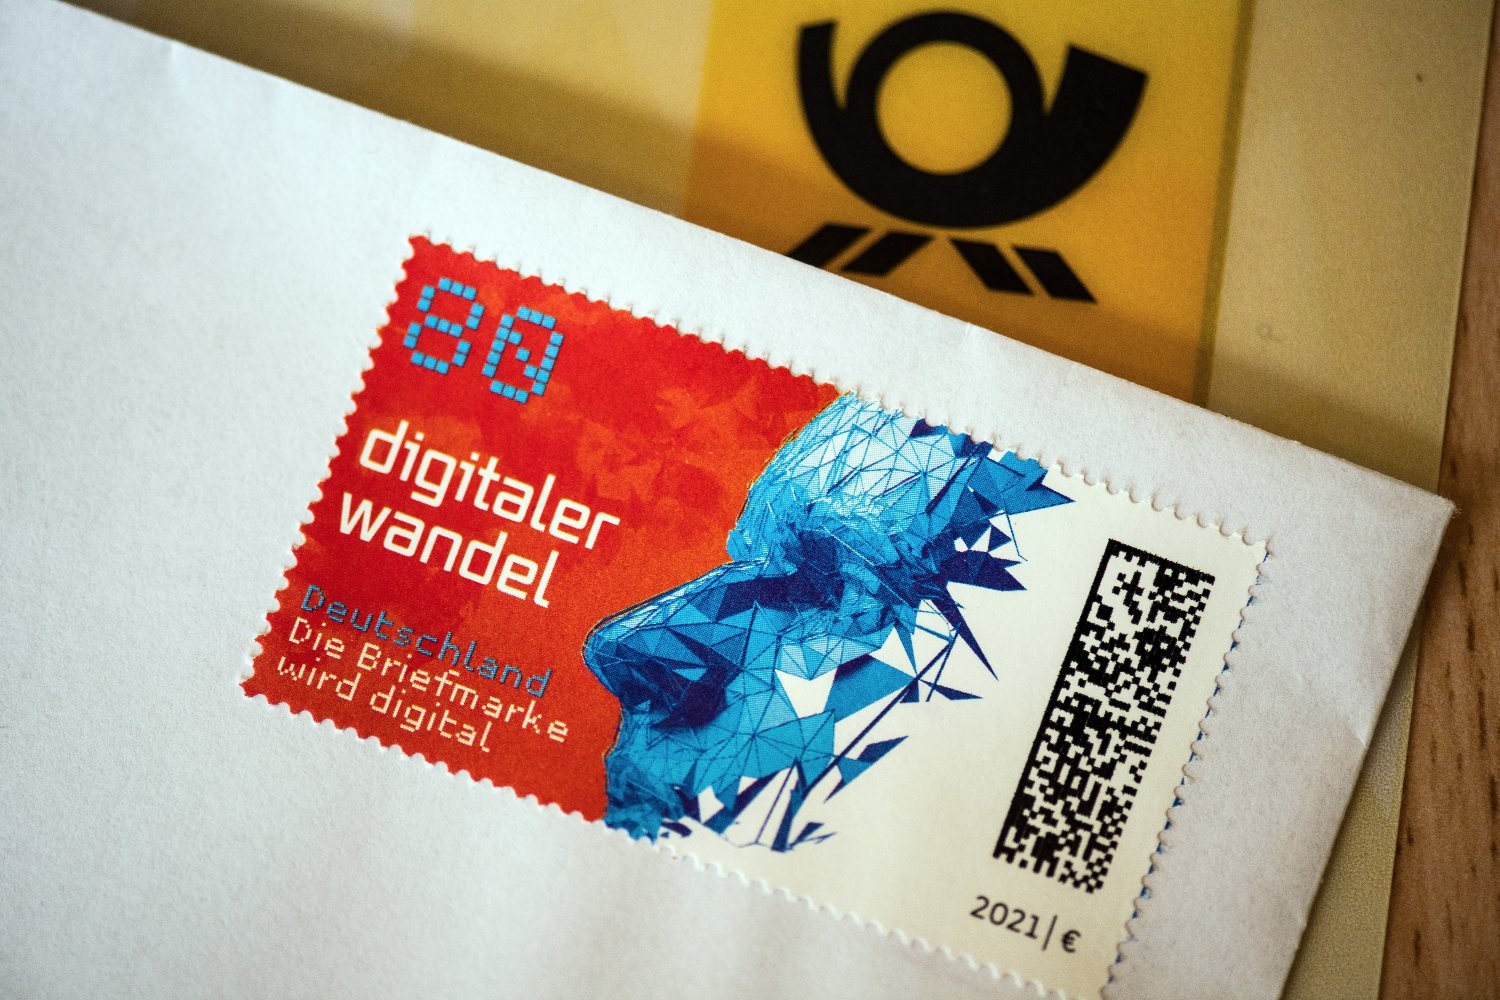 ‘A new generation of stamps’: Deutsche Post rolls out QR-style tracking codes